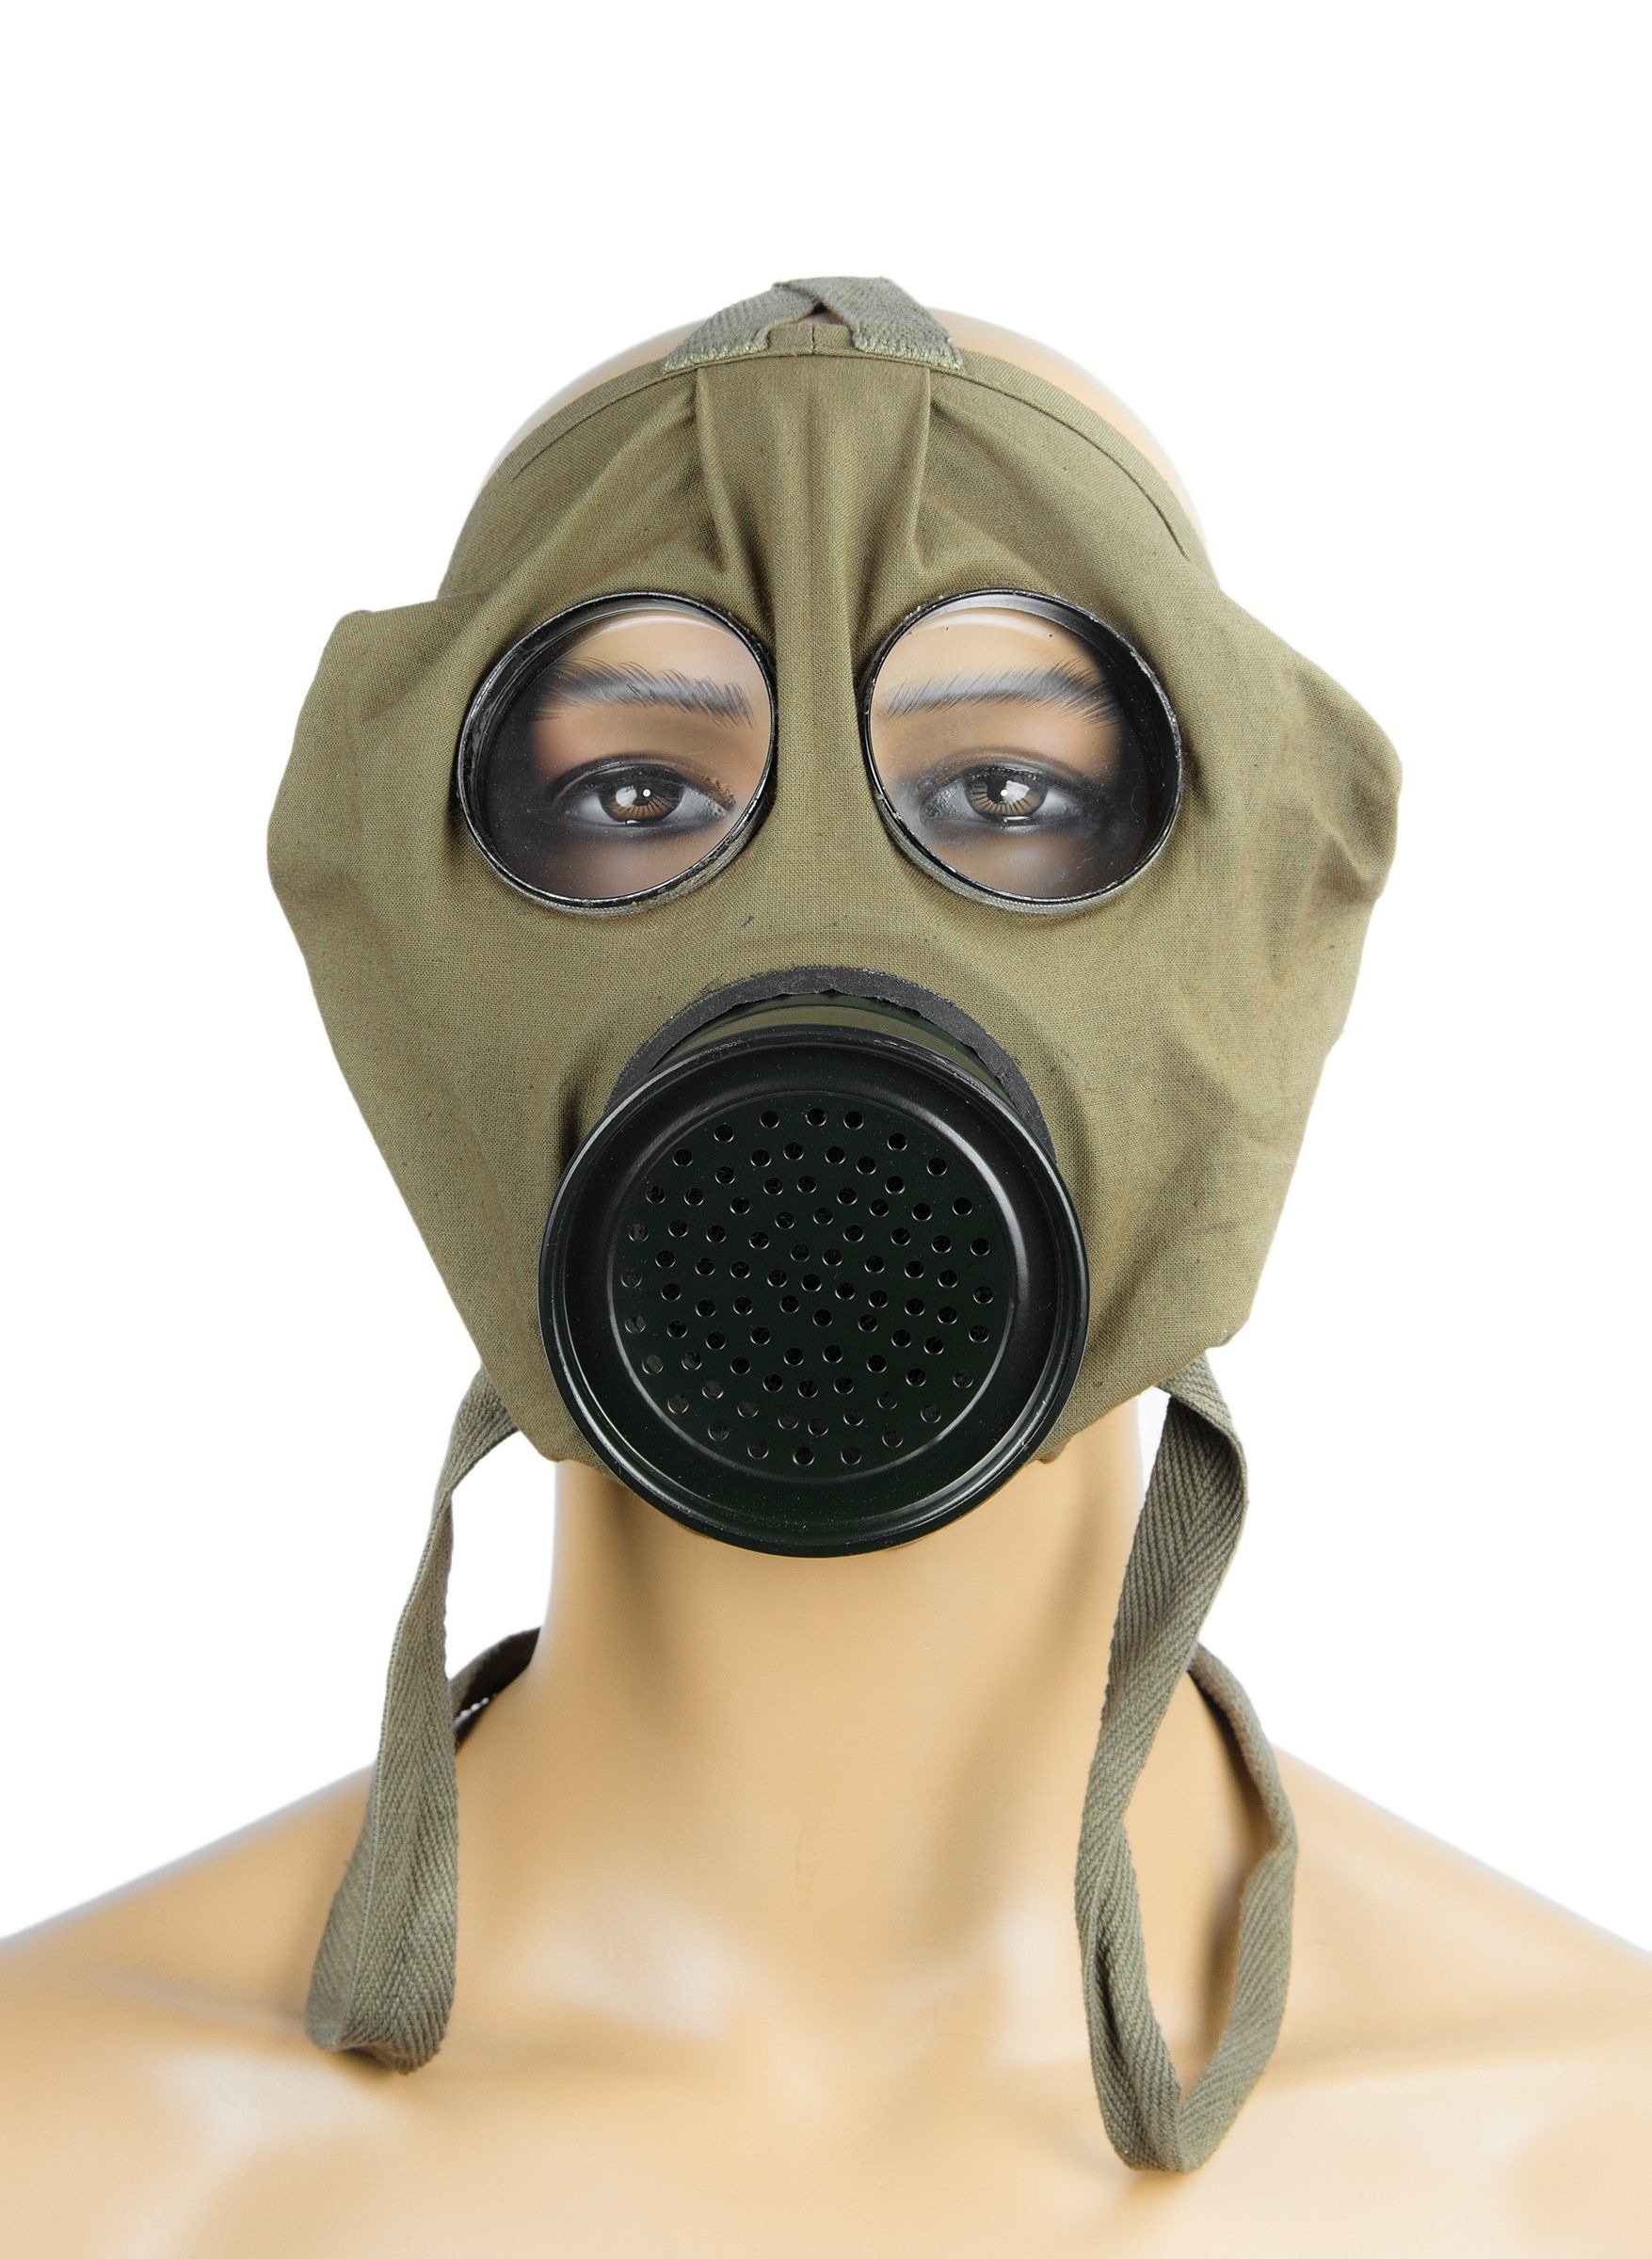 finnish gas mask filters